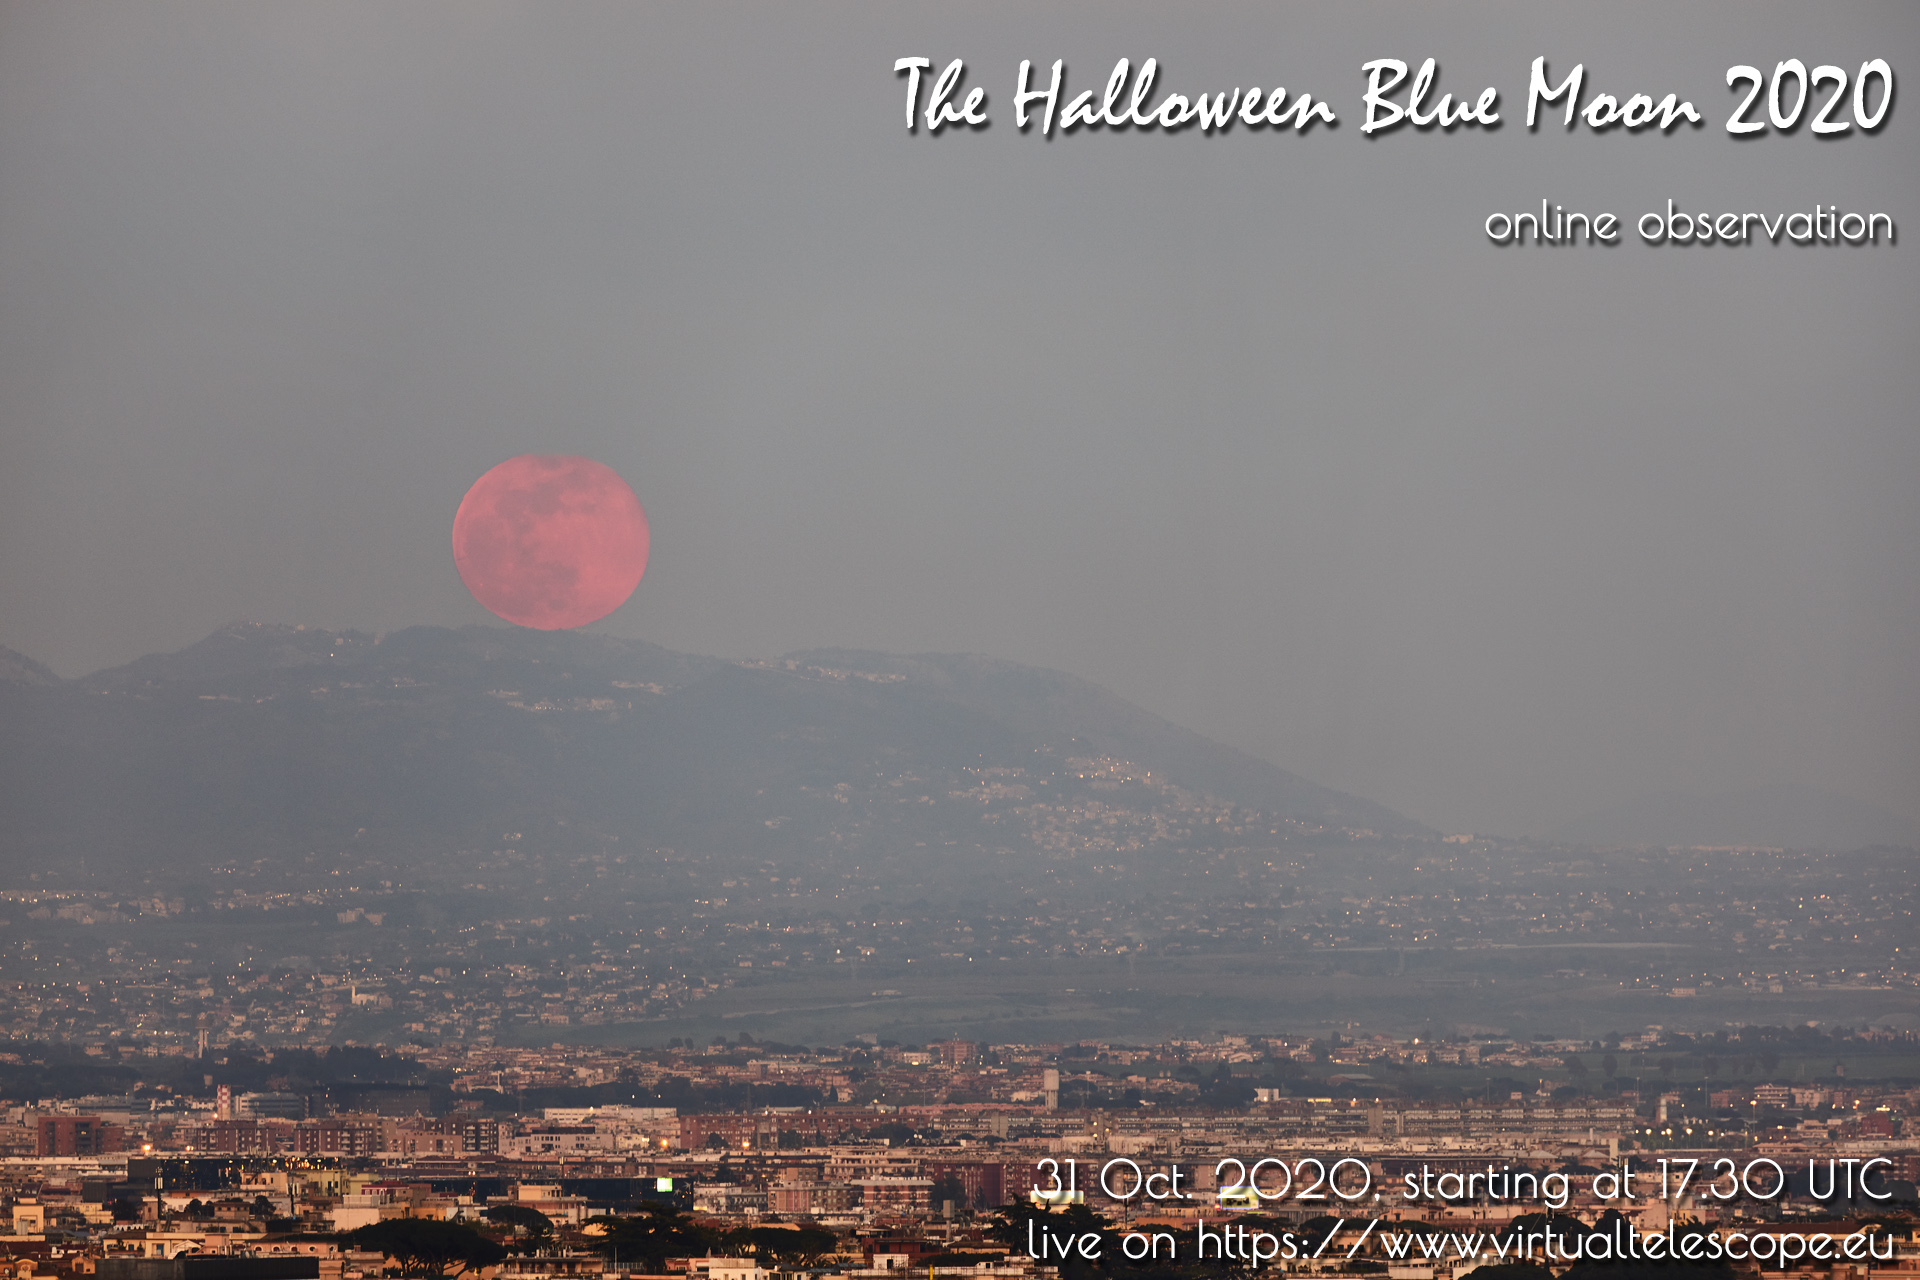 The Halloween Blue Moon 2020: poster of the event.